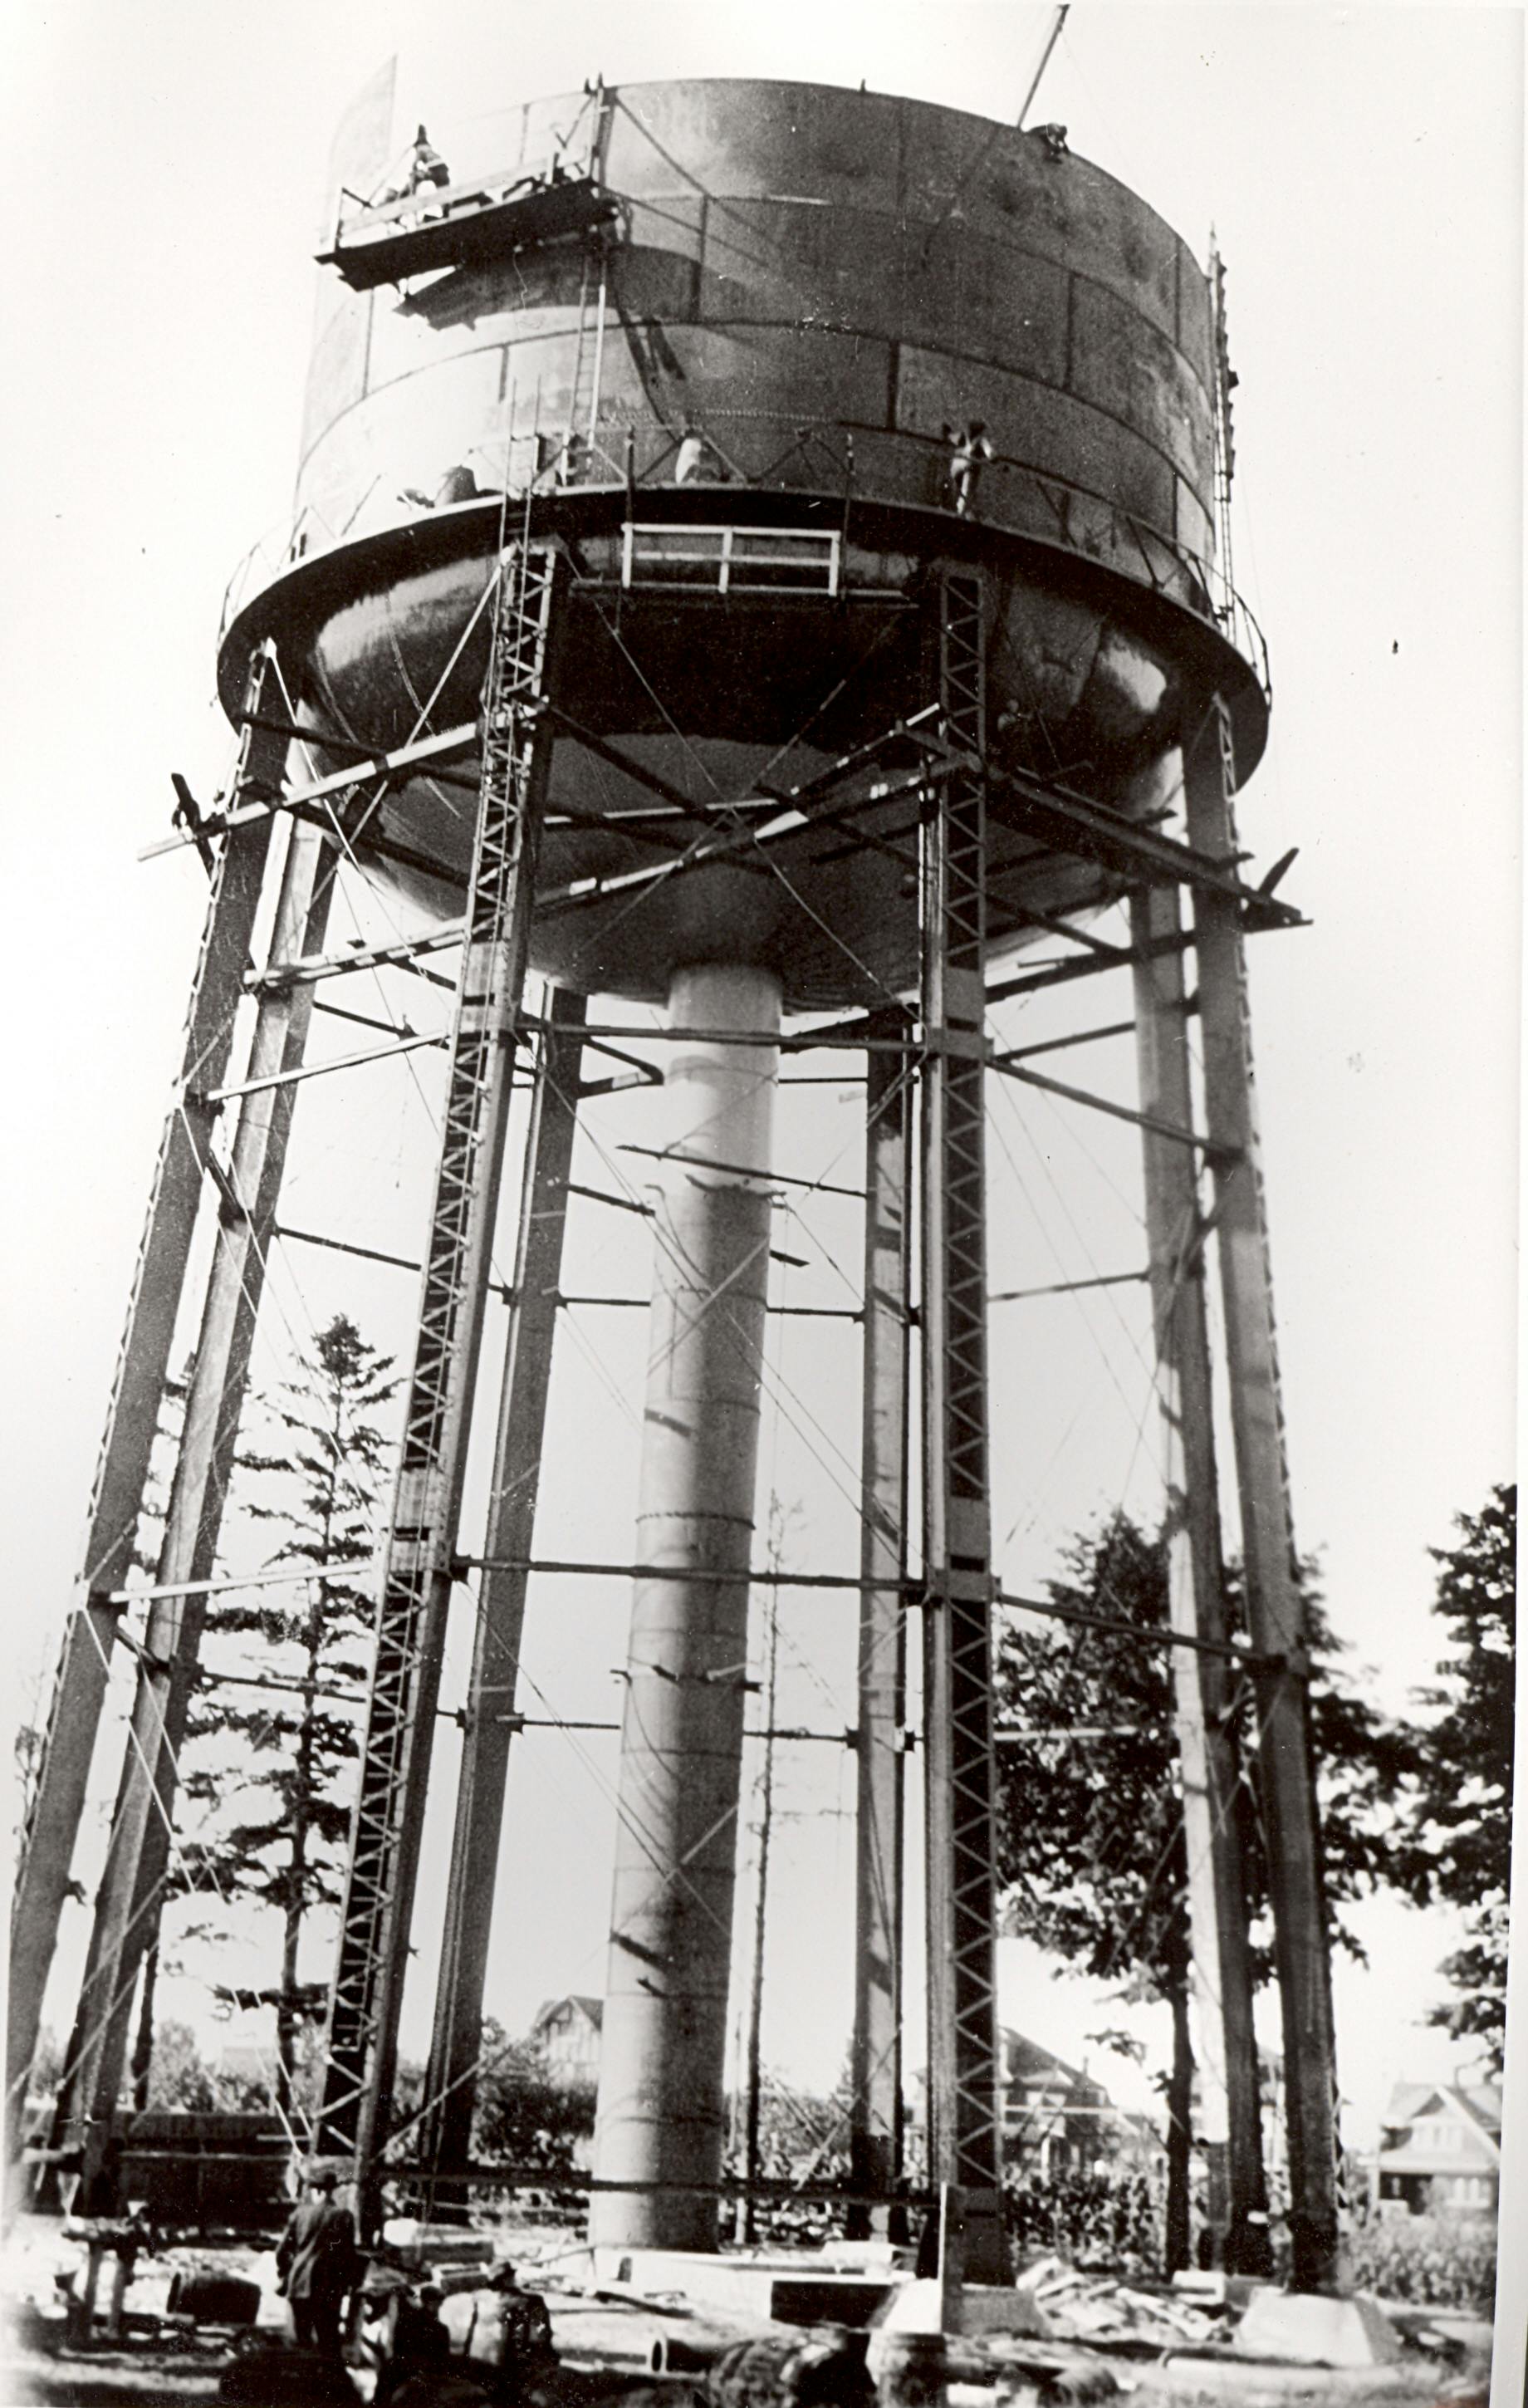 Construction of Water Tower - The Thomas Bouckley Collection - The Robert McLaughlin Gallery, Oshawa - 0097